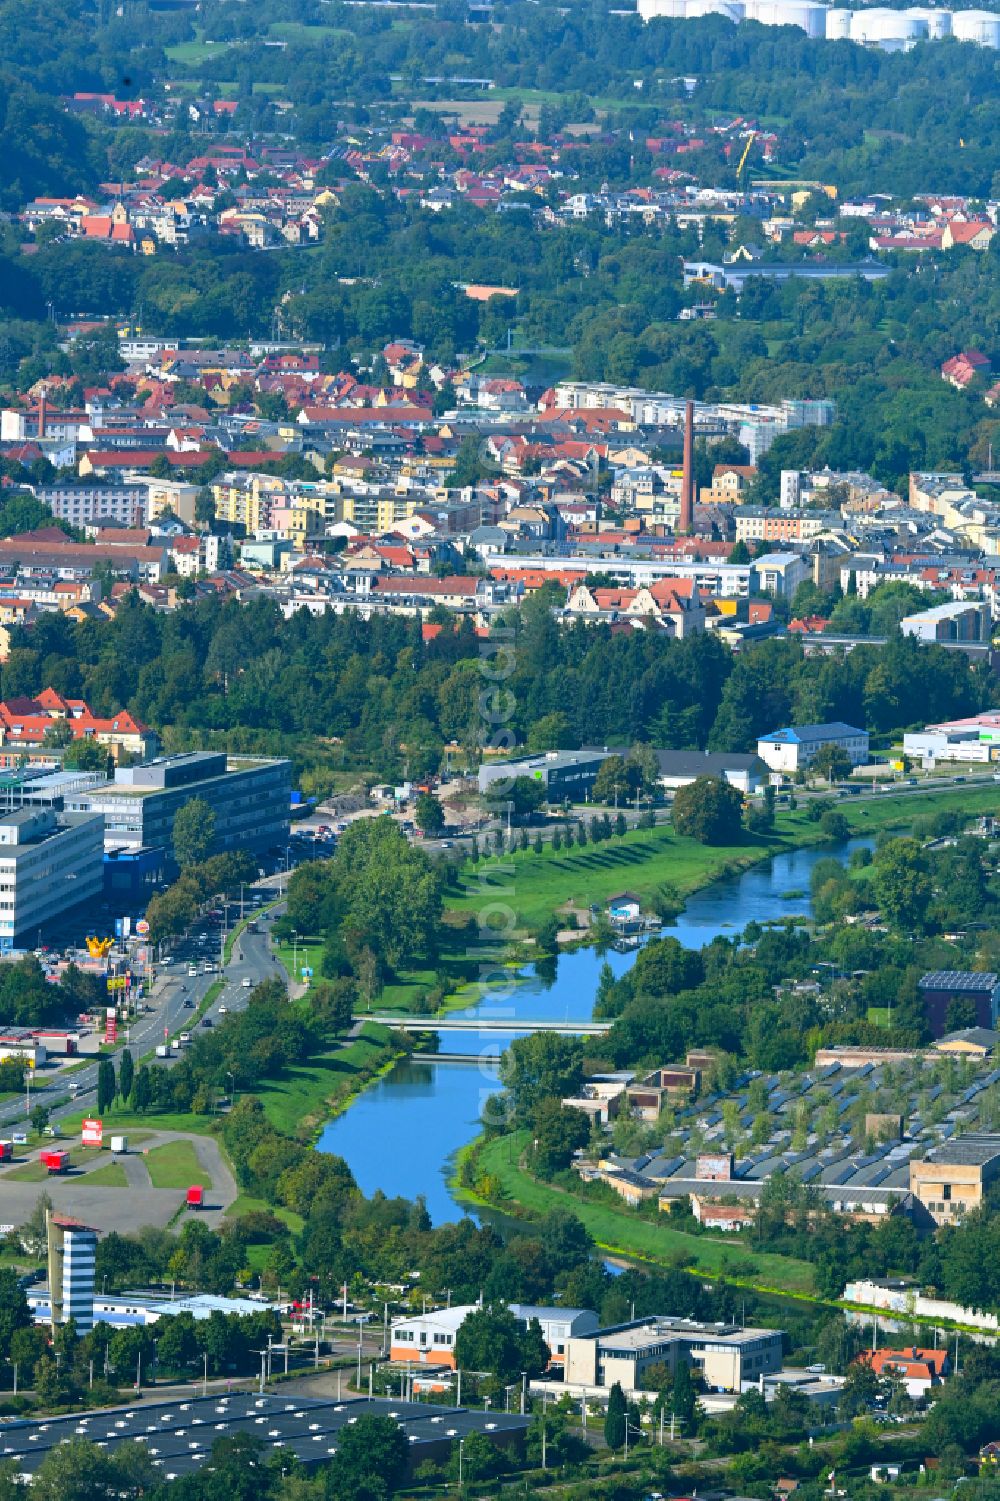 Aerial image Gera - City center in the downtown area on the banks of river course Weisse Elster on street Am Muehlgraben in Gera in the state Thuringia, Germany